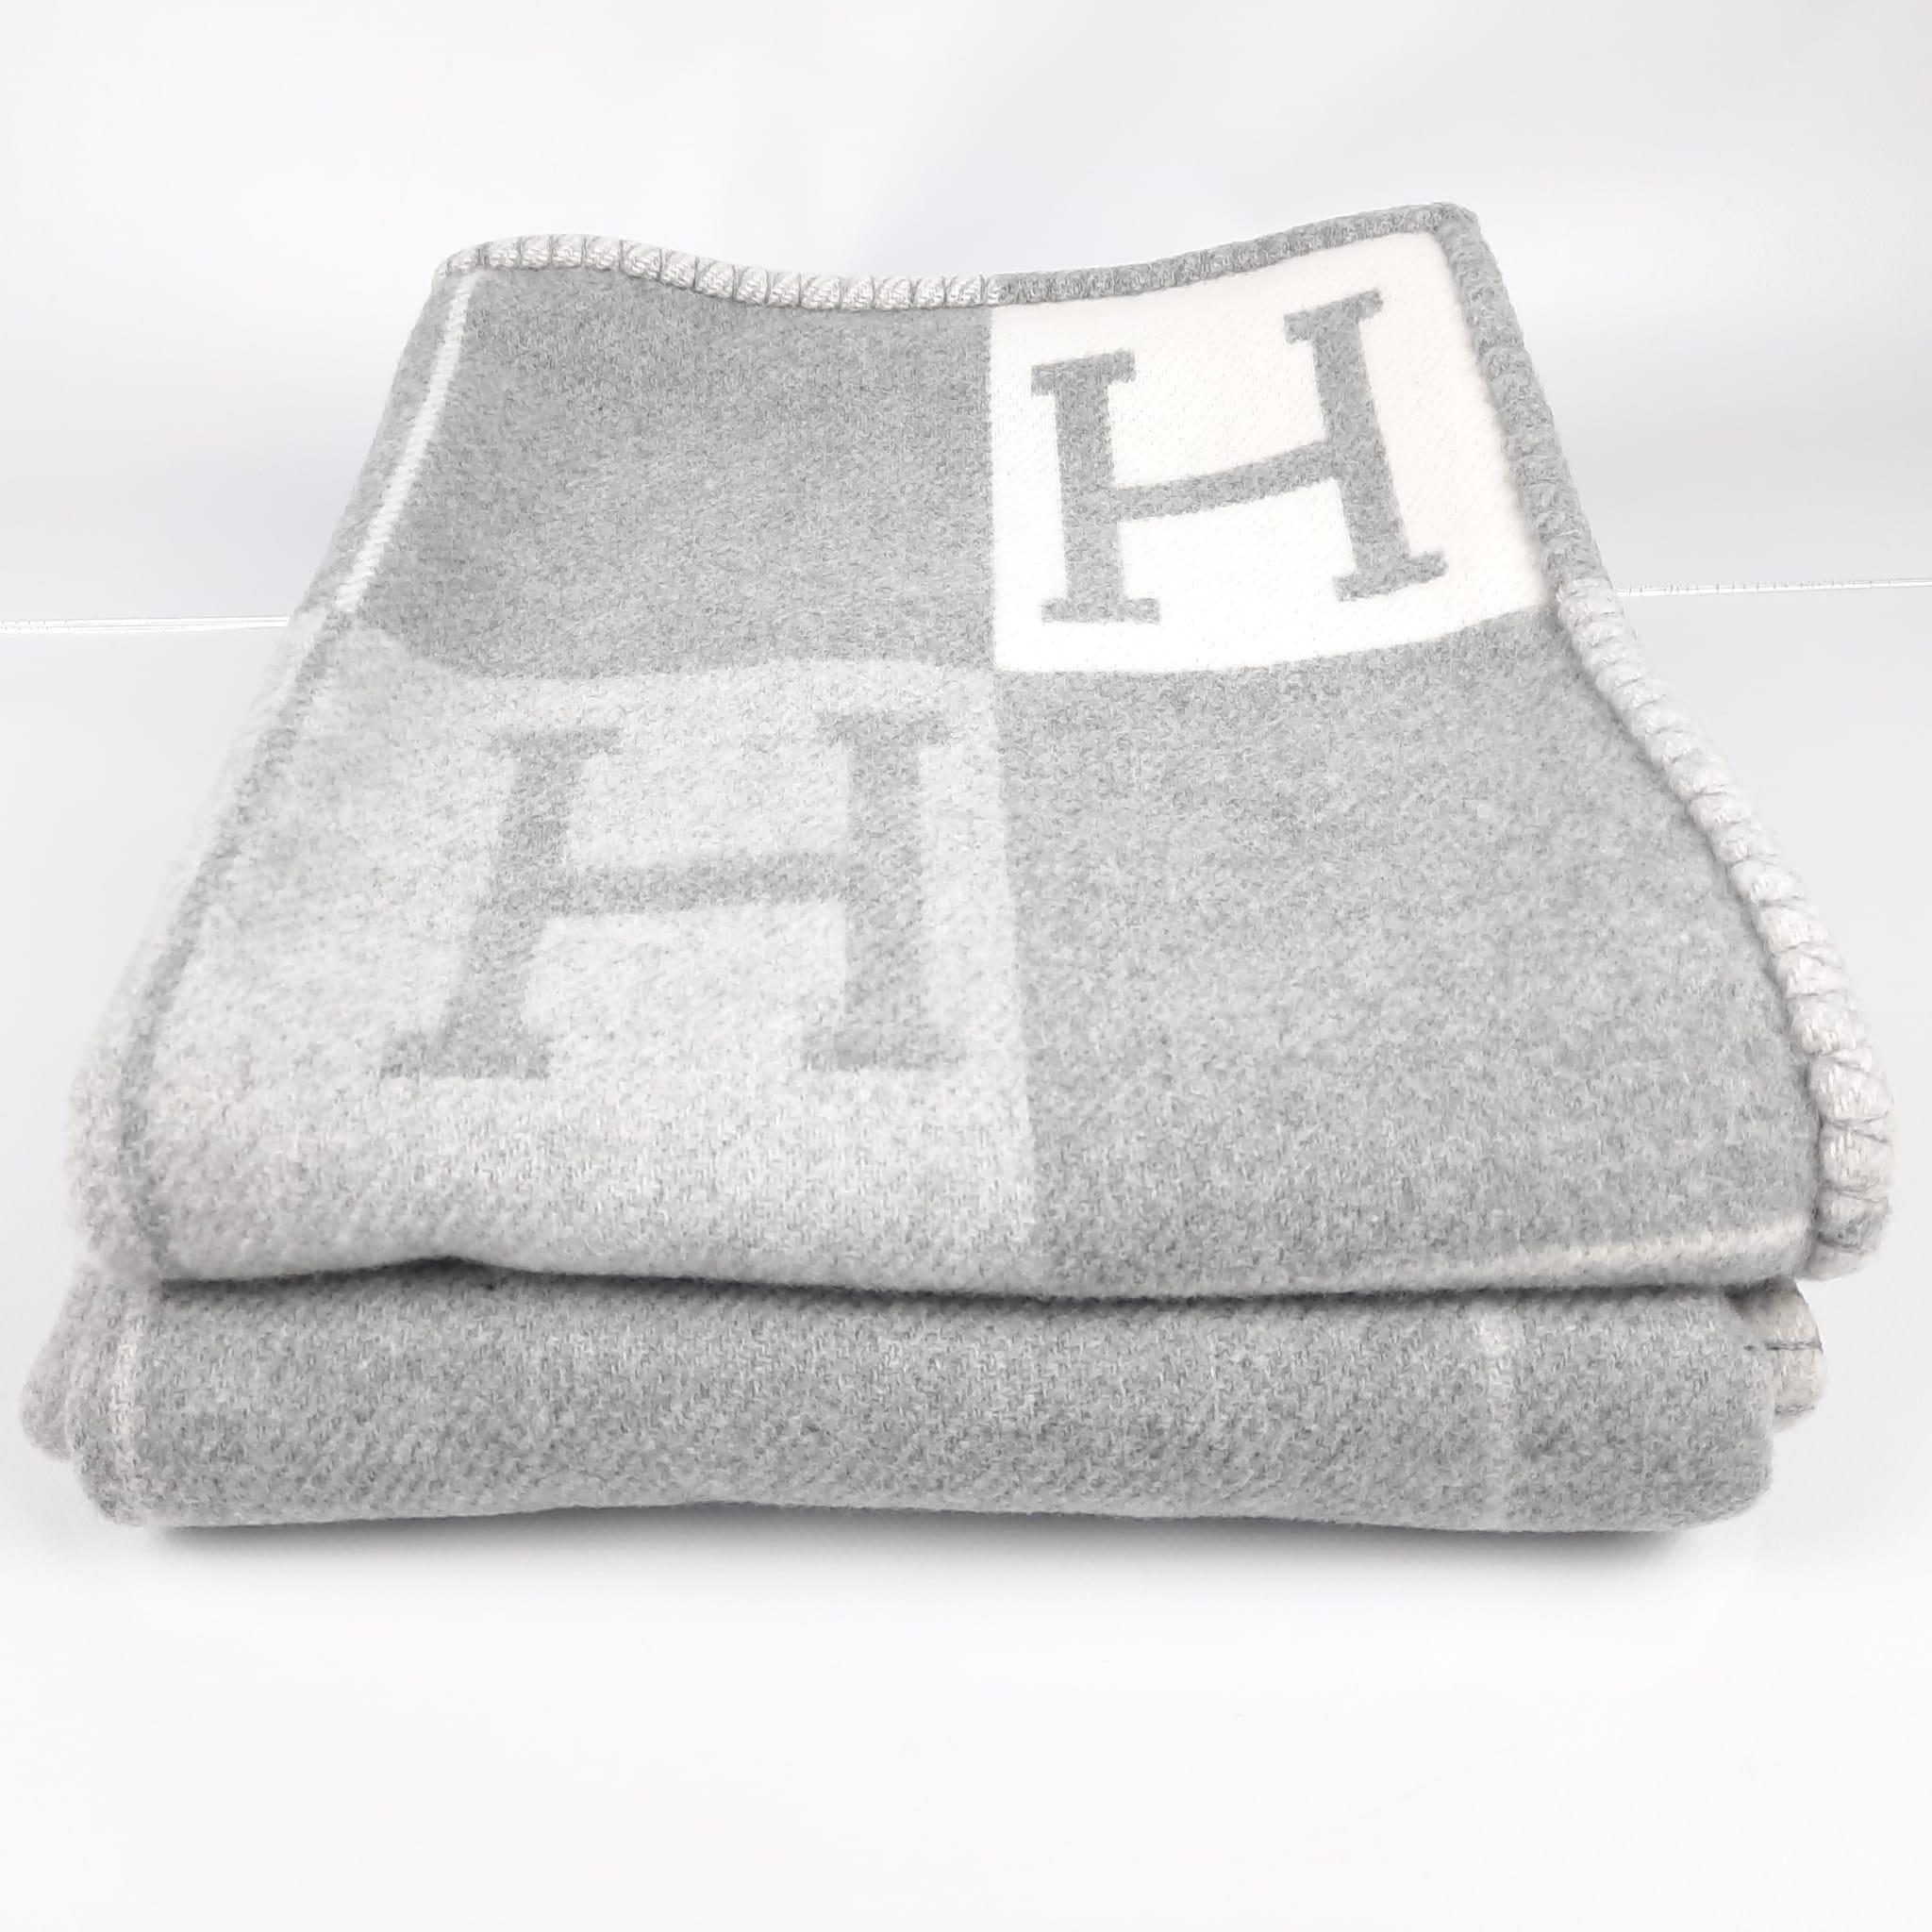 Throw blanket in jacquard woven wool and cashmere
Designed by Hermès Studio